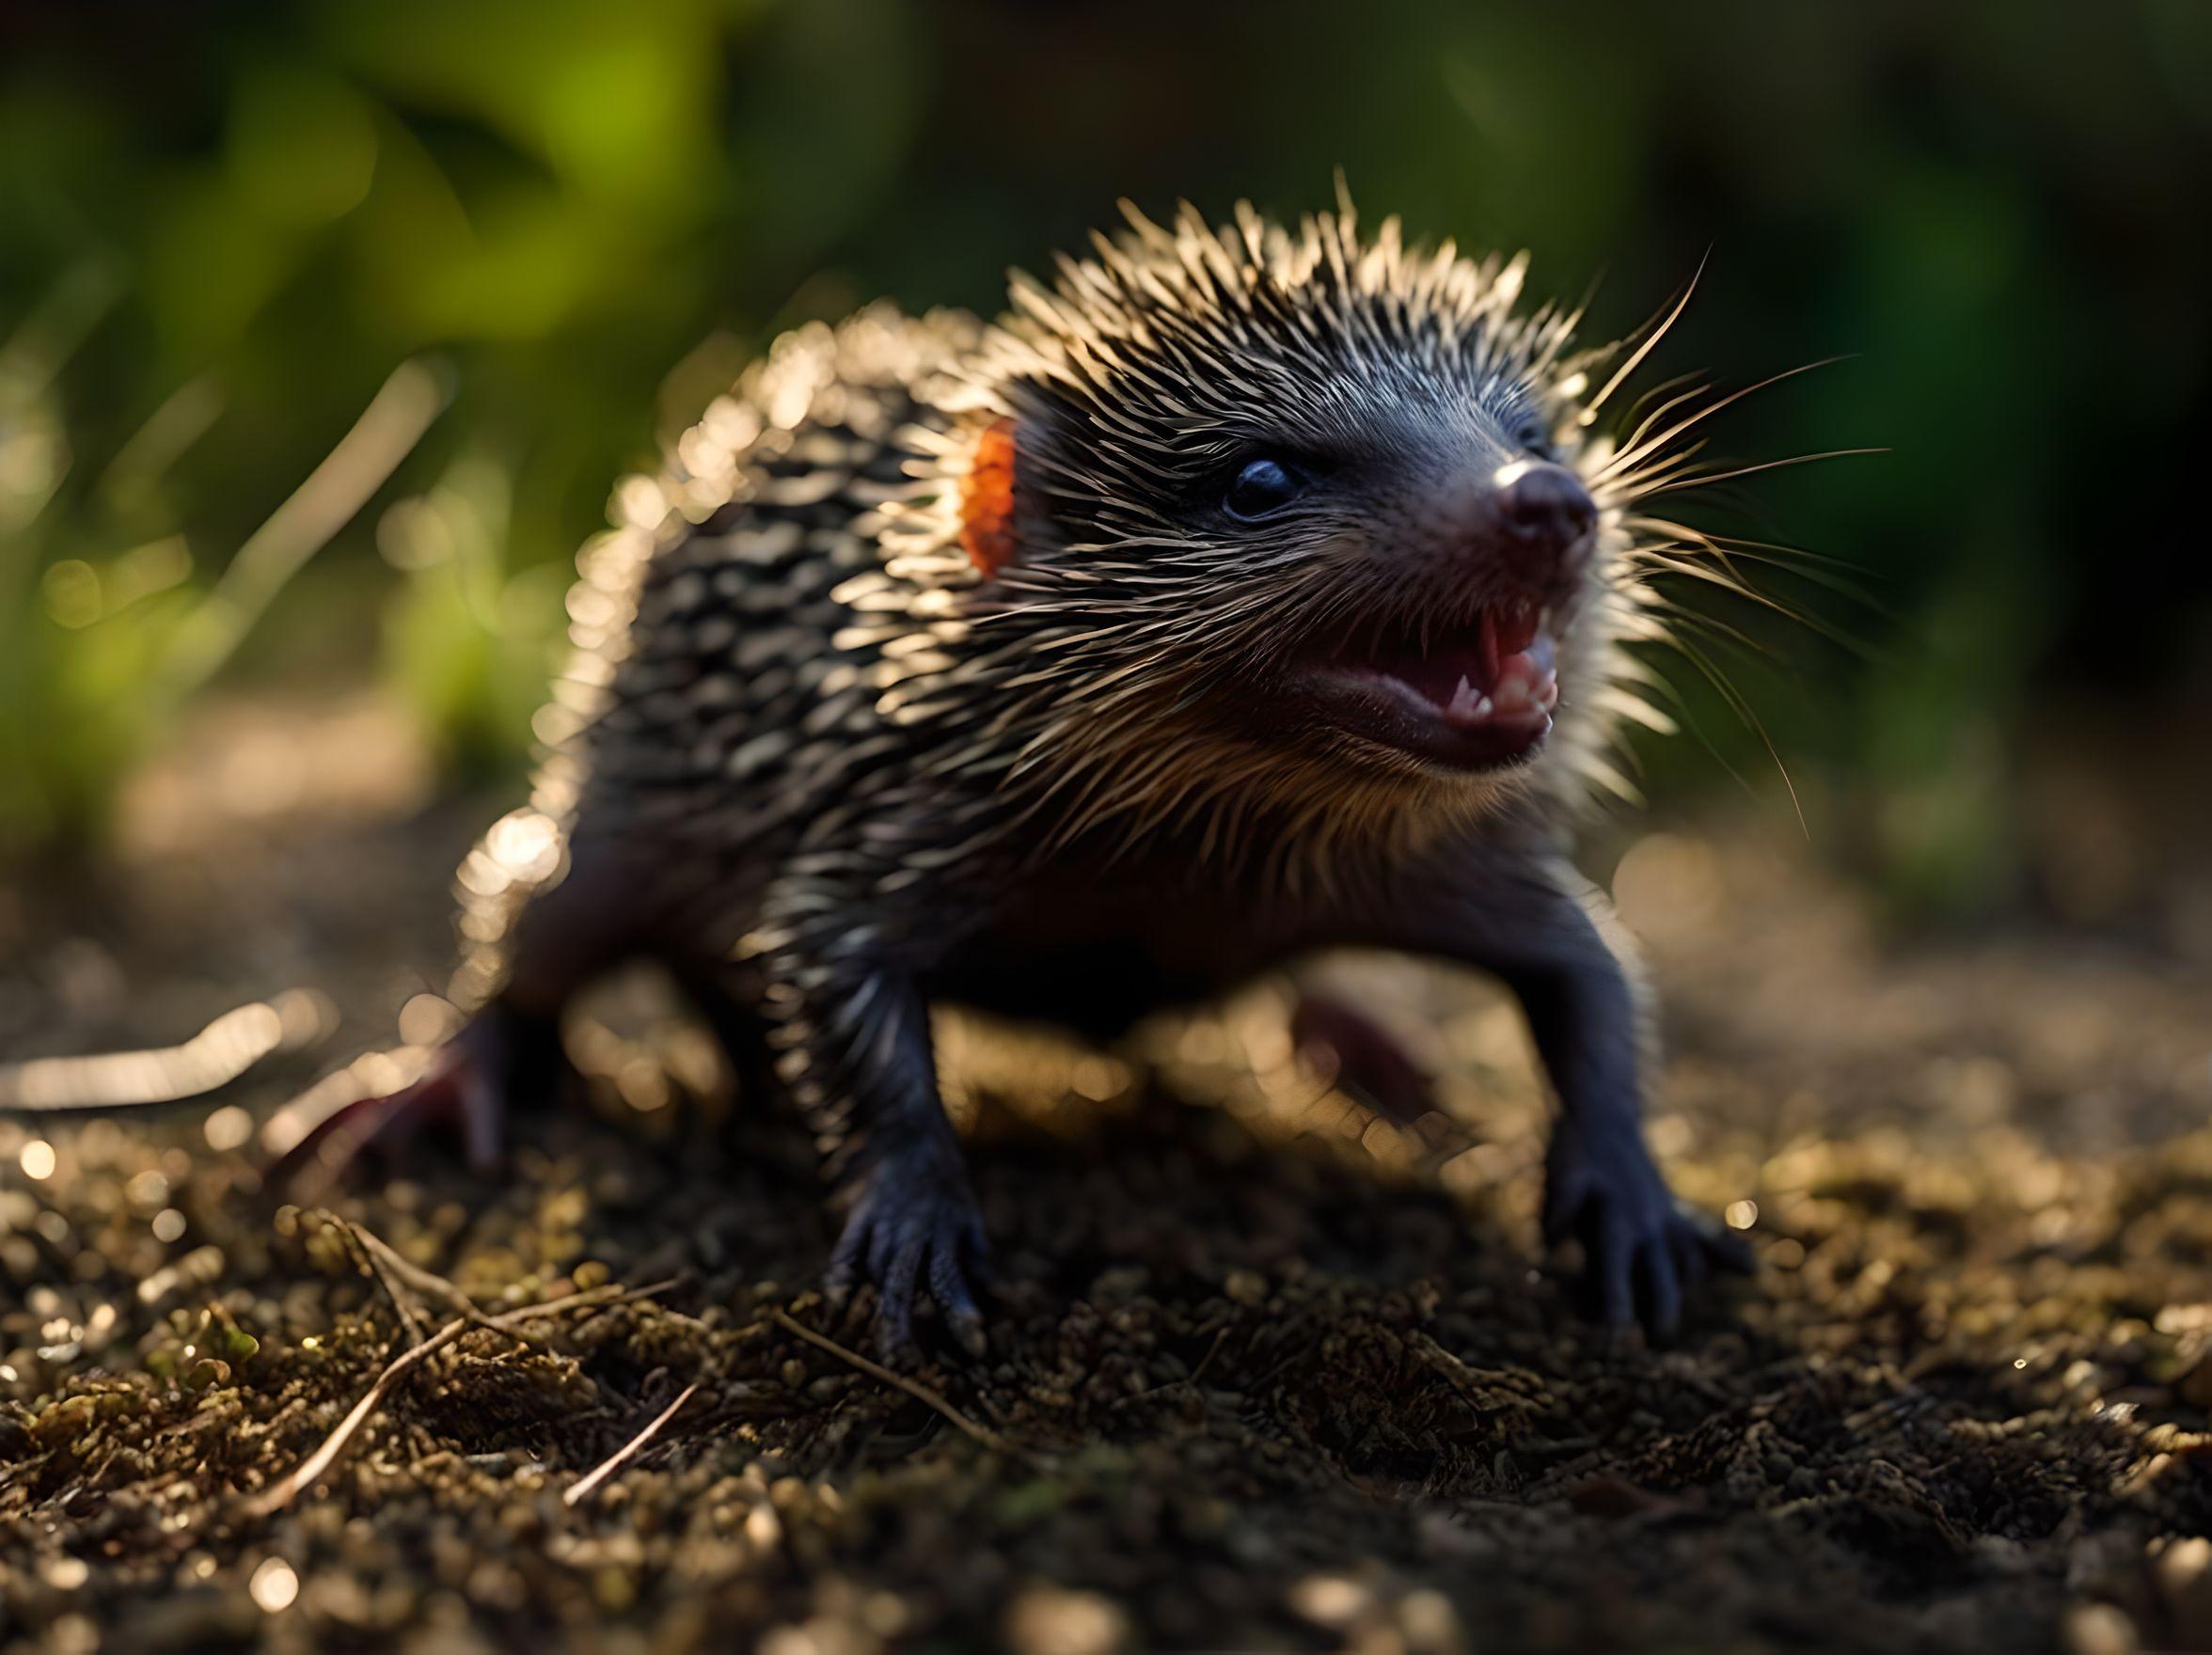 Hedgehog salamander hybrid with baboon canines protruding from the mouth.